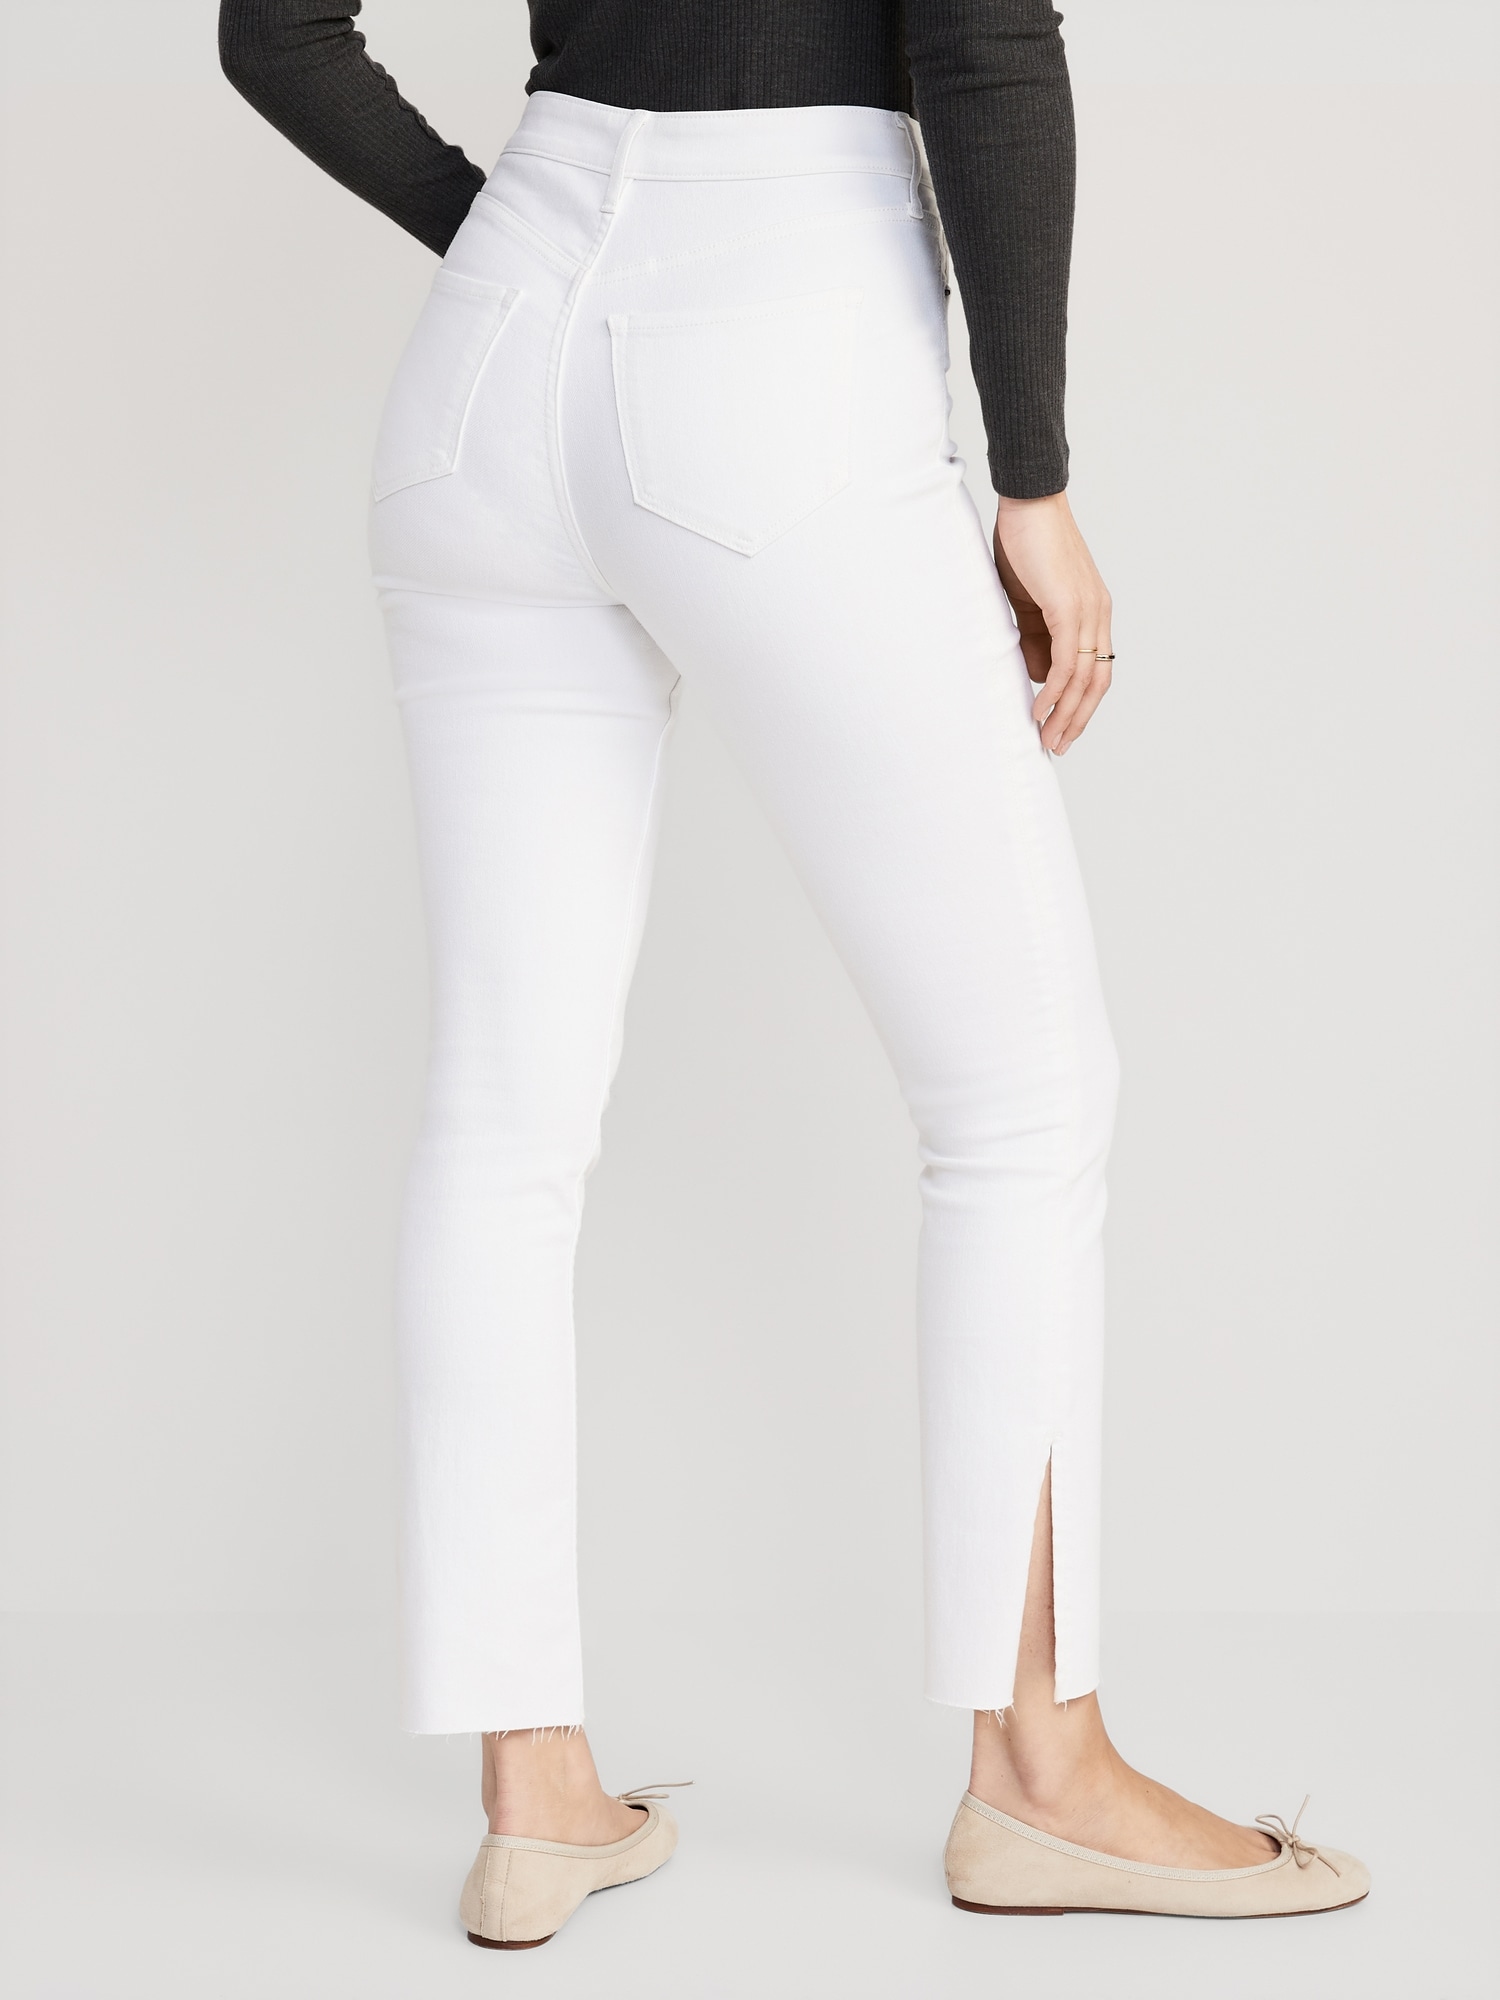 Extra High-Waisted Rockstar 360° Stretch Super-Skinny White Jeans for Women | Old Navy